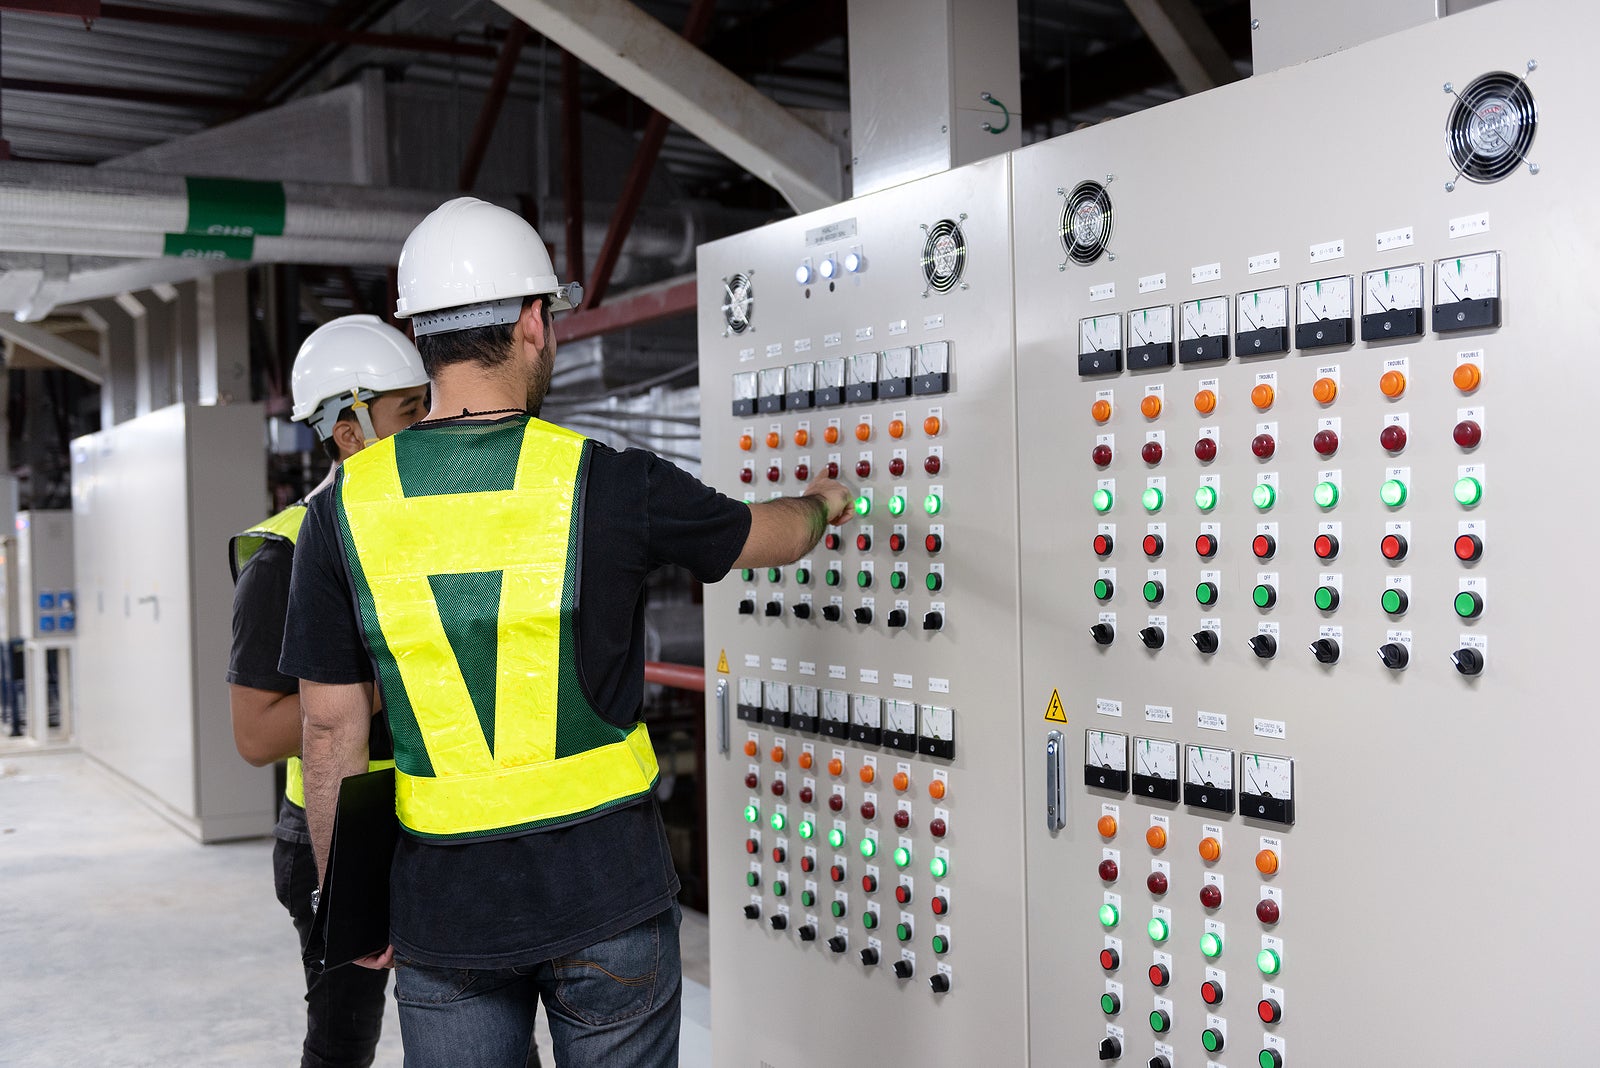 Electrical Engineer team working front HVAC control panels, Technician discussion and training daily check controls system for security functions in service room at factory.